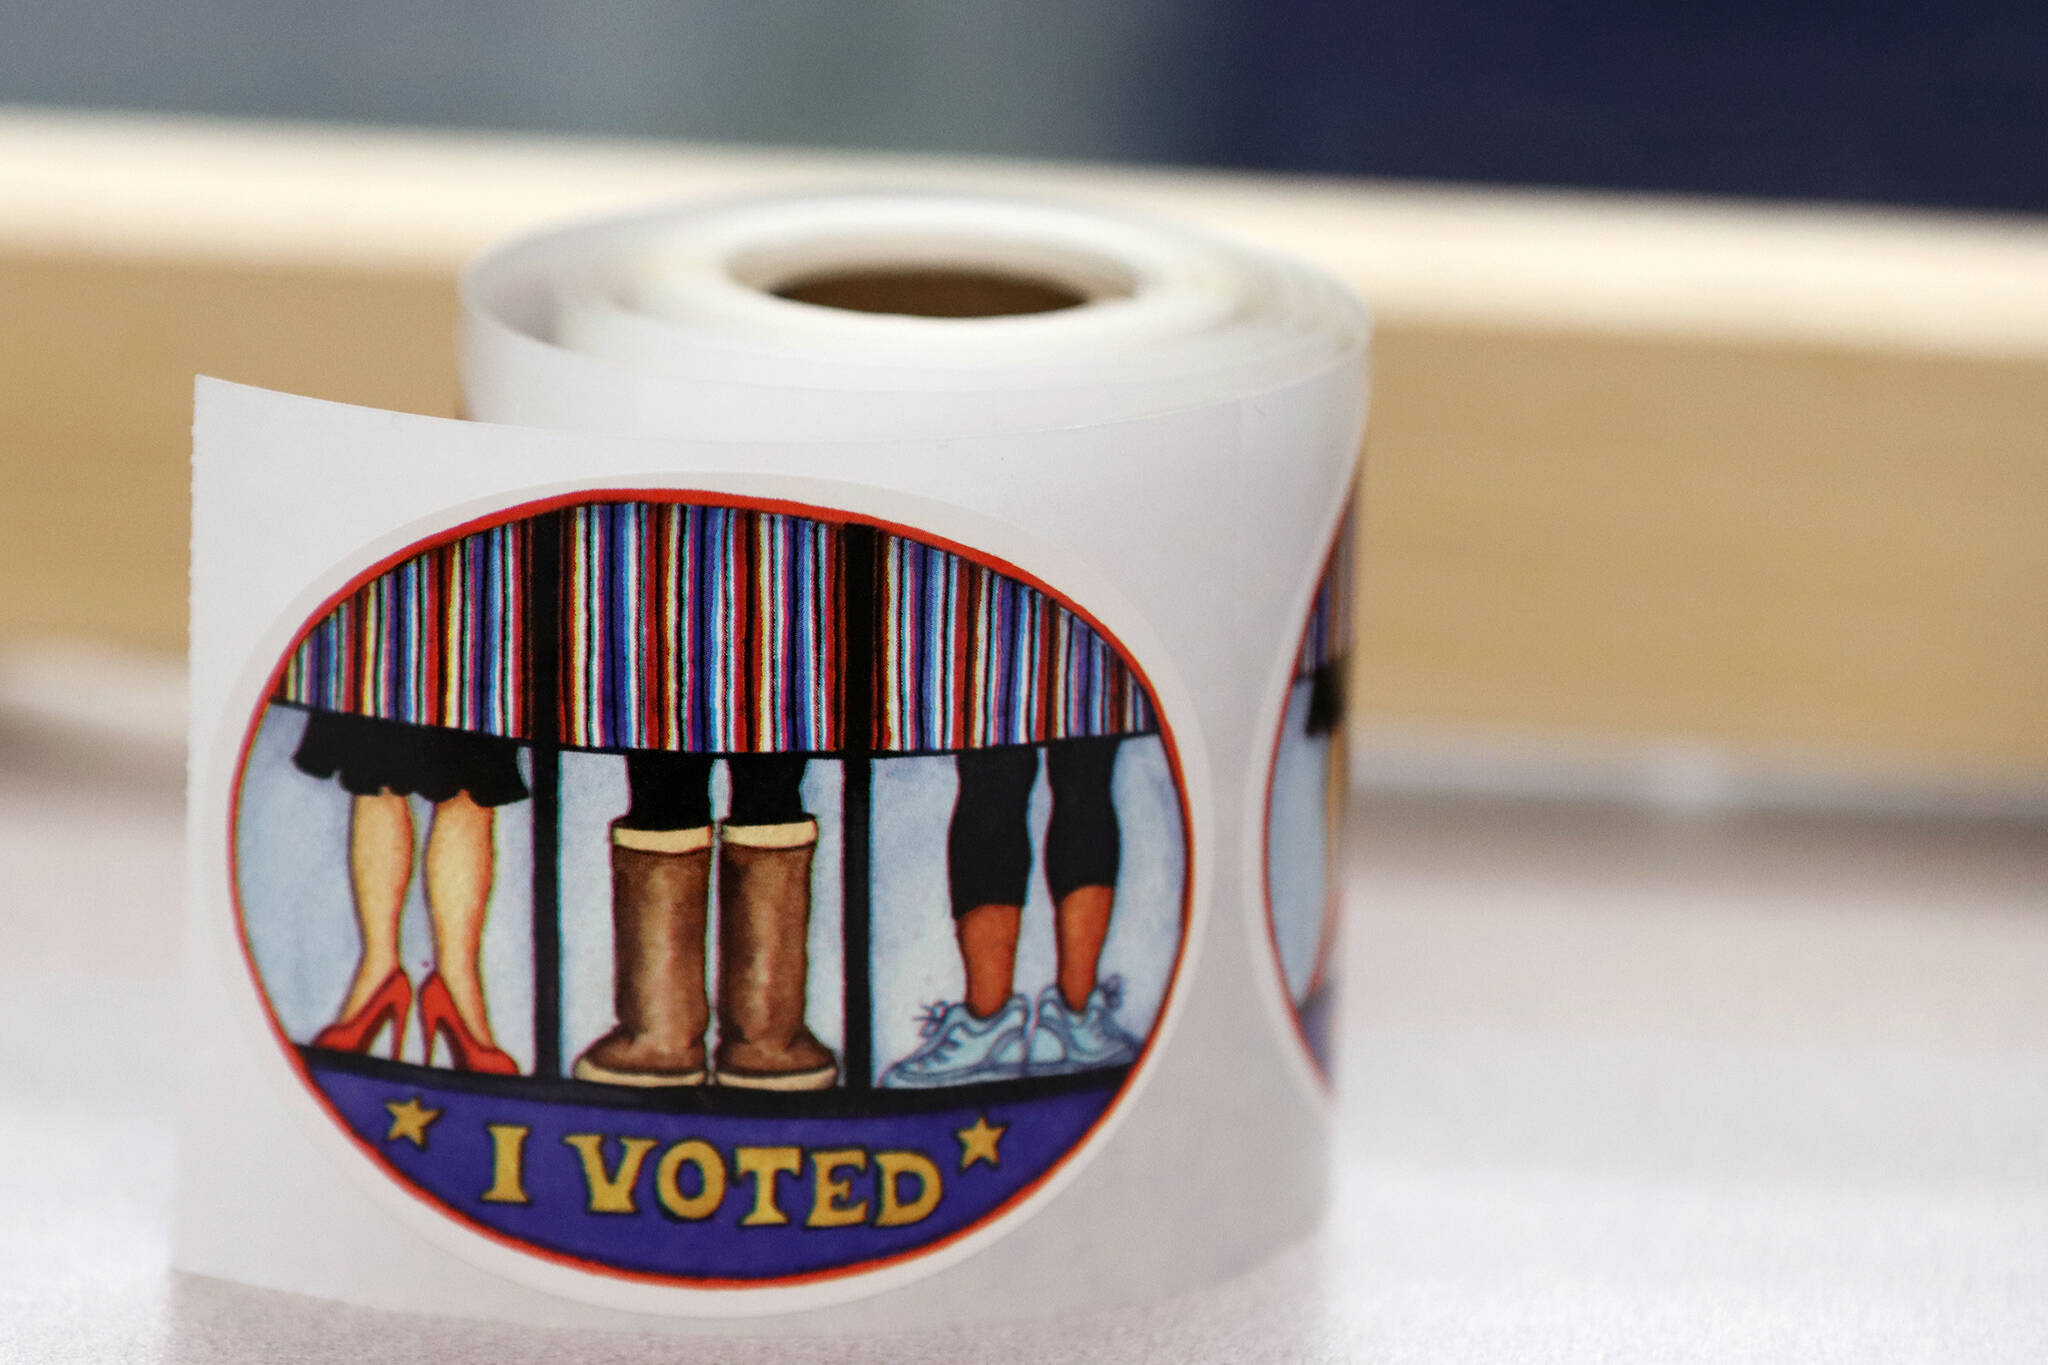 A roll of I voted stickers await voters on Saturday at the Alaska Division of Elections office in Juneau. (Ben Hohenstatt / Juneau Empire File)